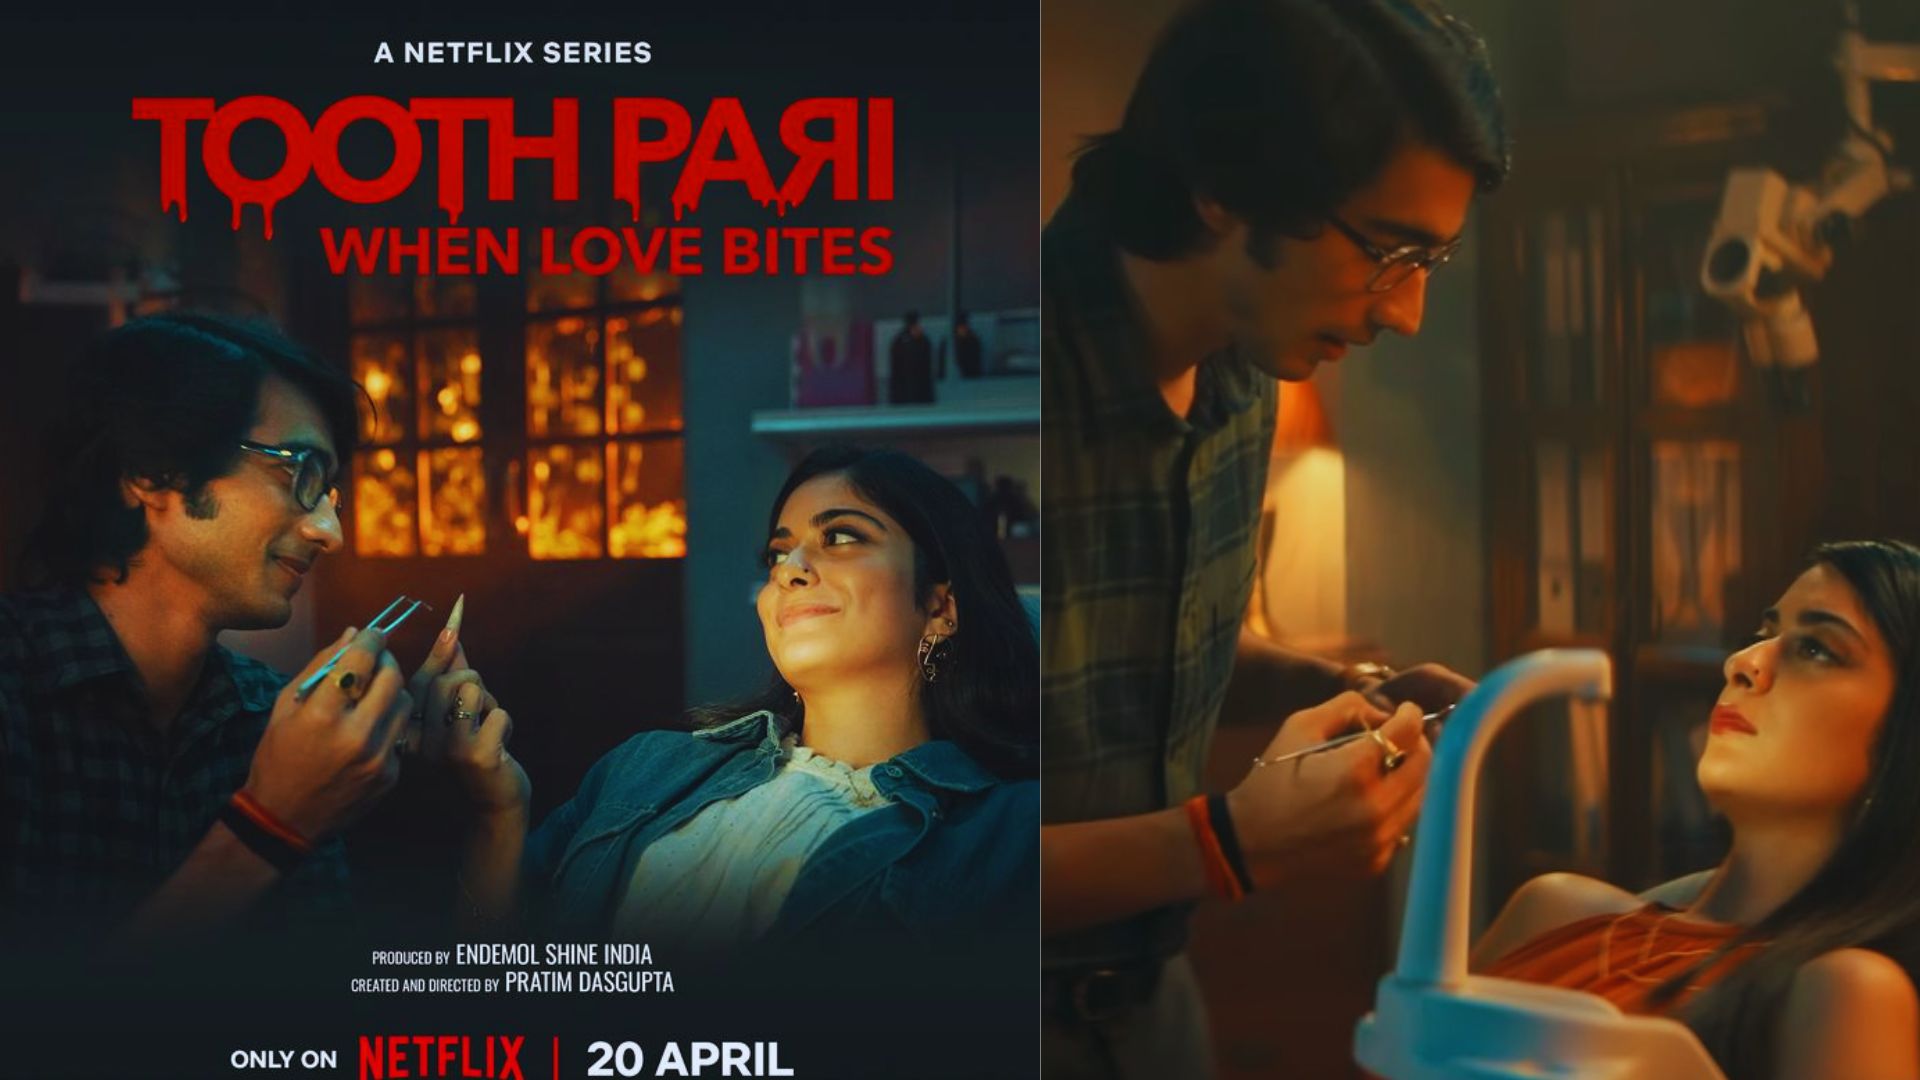 How to Watch Tooth Pari: When Love Bites Series Online For Free?